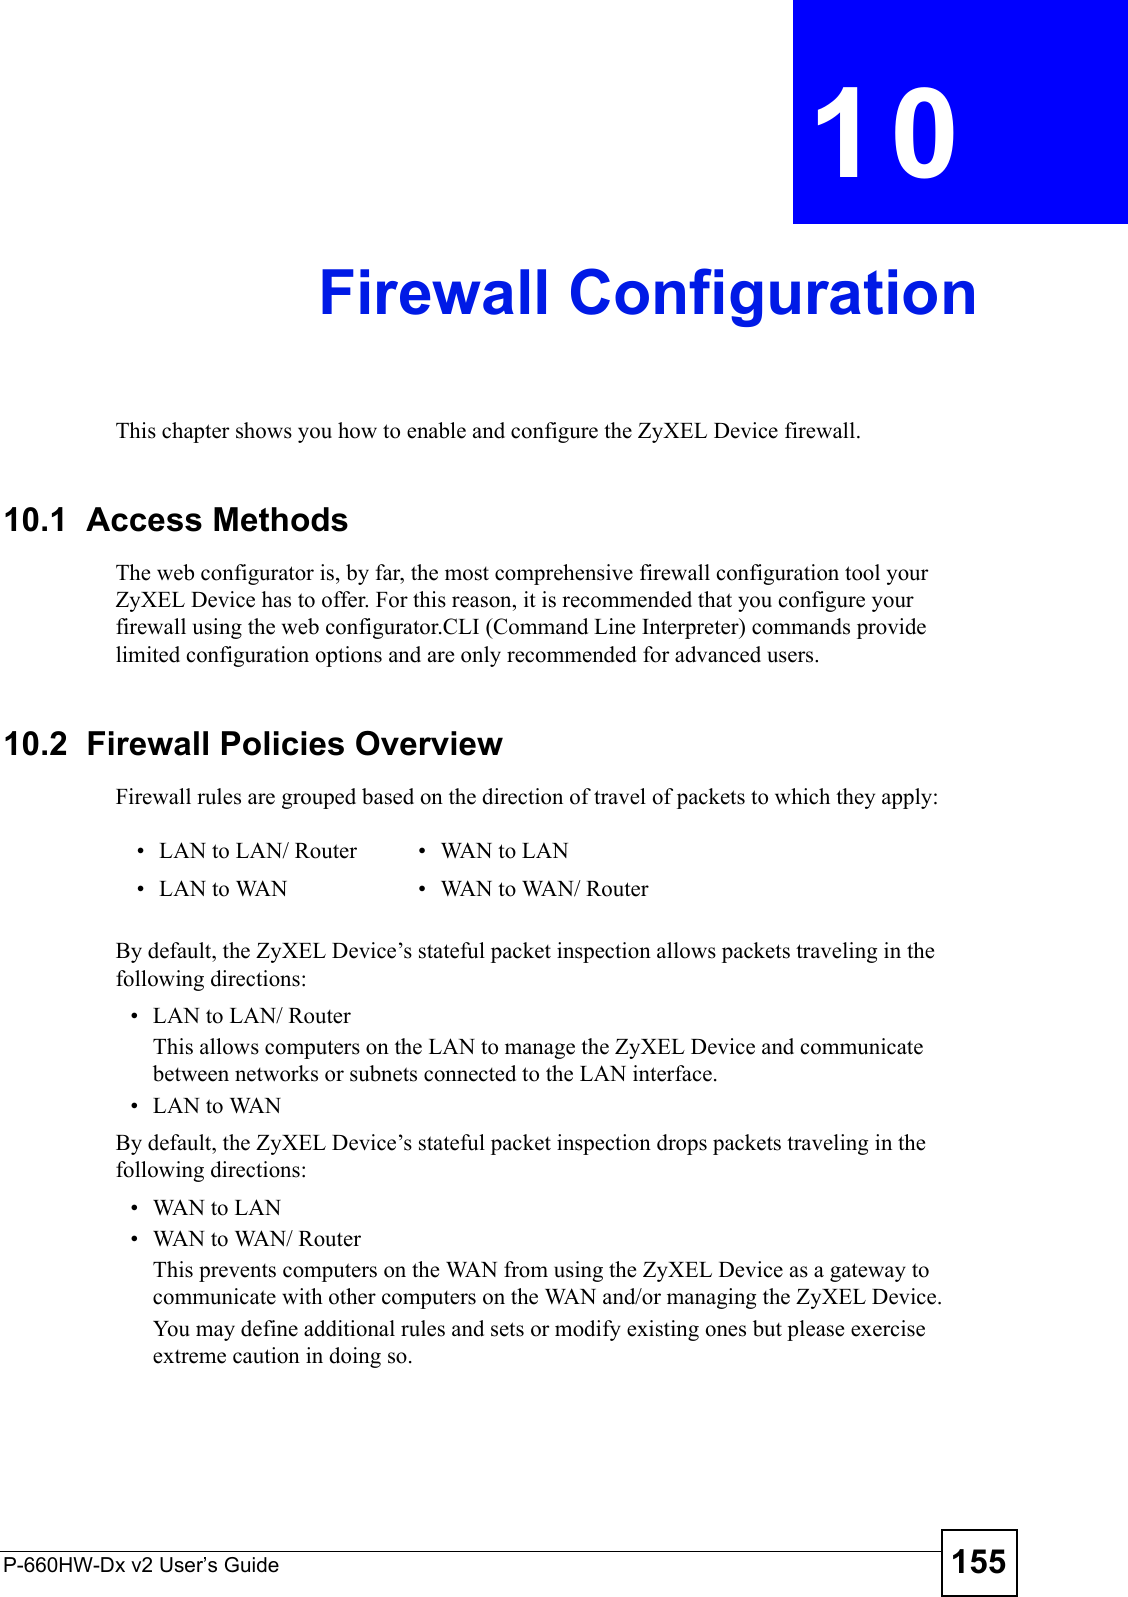 P-660HW-Dx v2 User’s Guide 155CHAPTER  10 Firewall ConfigurationThis chapter shows you how to enable and configure the ZyXEL Device firewall.10.1  Access MethodsThe web configurator is, by far, the most comprehensive firewall configuration tool your ZyXEL Device has to offer. For this reason, it is recommended that you configure your firewall using the web configurator.CLI (Command Line Interpreter) commands provide limited configuration options and are only recommended for advanced users.10.2  Firewall Policies Overview Firewall rules are grouped based on the direction of travel of packets to which they apply: By default, the ZyXEL Device’s stateful packet inspection allows packets traveling in the following directions:• LAN to LAN/ Router This allows computers on the LAN to manage the ZyXEL Device and communicate between networks or subnets connected to the LAN interface.• LAN to WANBy default, the ZyXEL Device’s stateful packet inspection drops packets traveling in the following directions:•WAN to LAN•WAN to WAN/ Router This prevents computers on the WAN from using the ZyXEL Device as a gateway to communicate with other computers on the WAN and/or managing the ZyXEL Device.You may define additional rules and sets or modify existing ones but please exercise extreme caution in doing so.• LAN to LAN/ Router • WAN to LAN• LAN to WAN • WAN to WAN/ Router